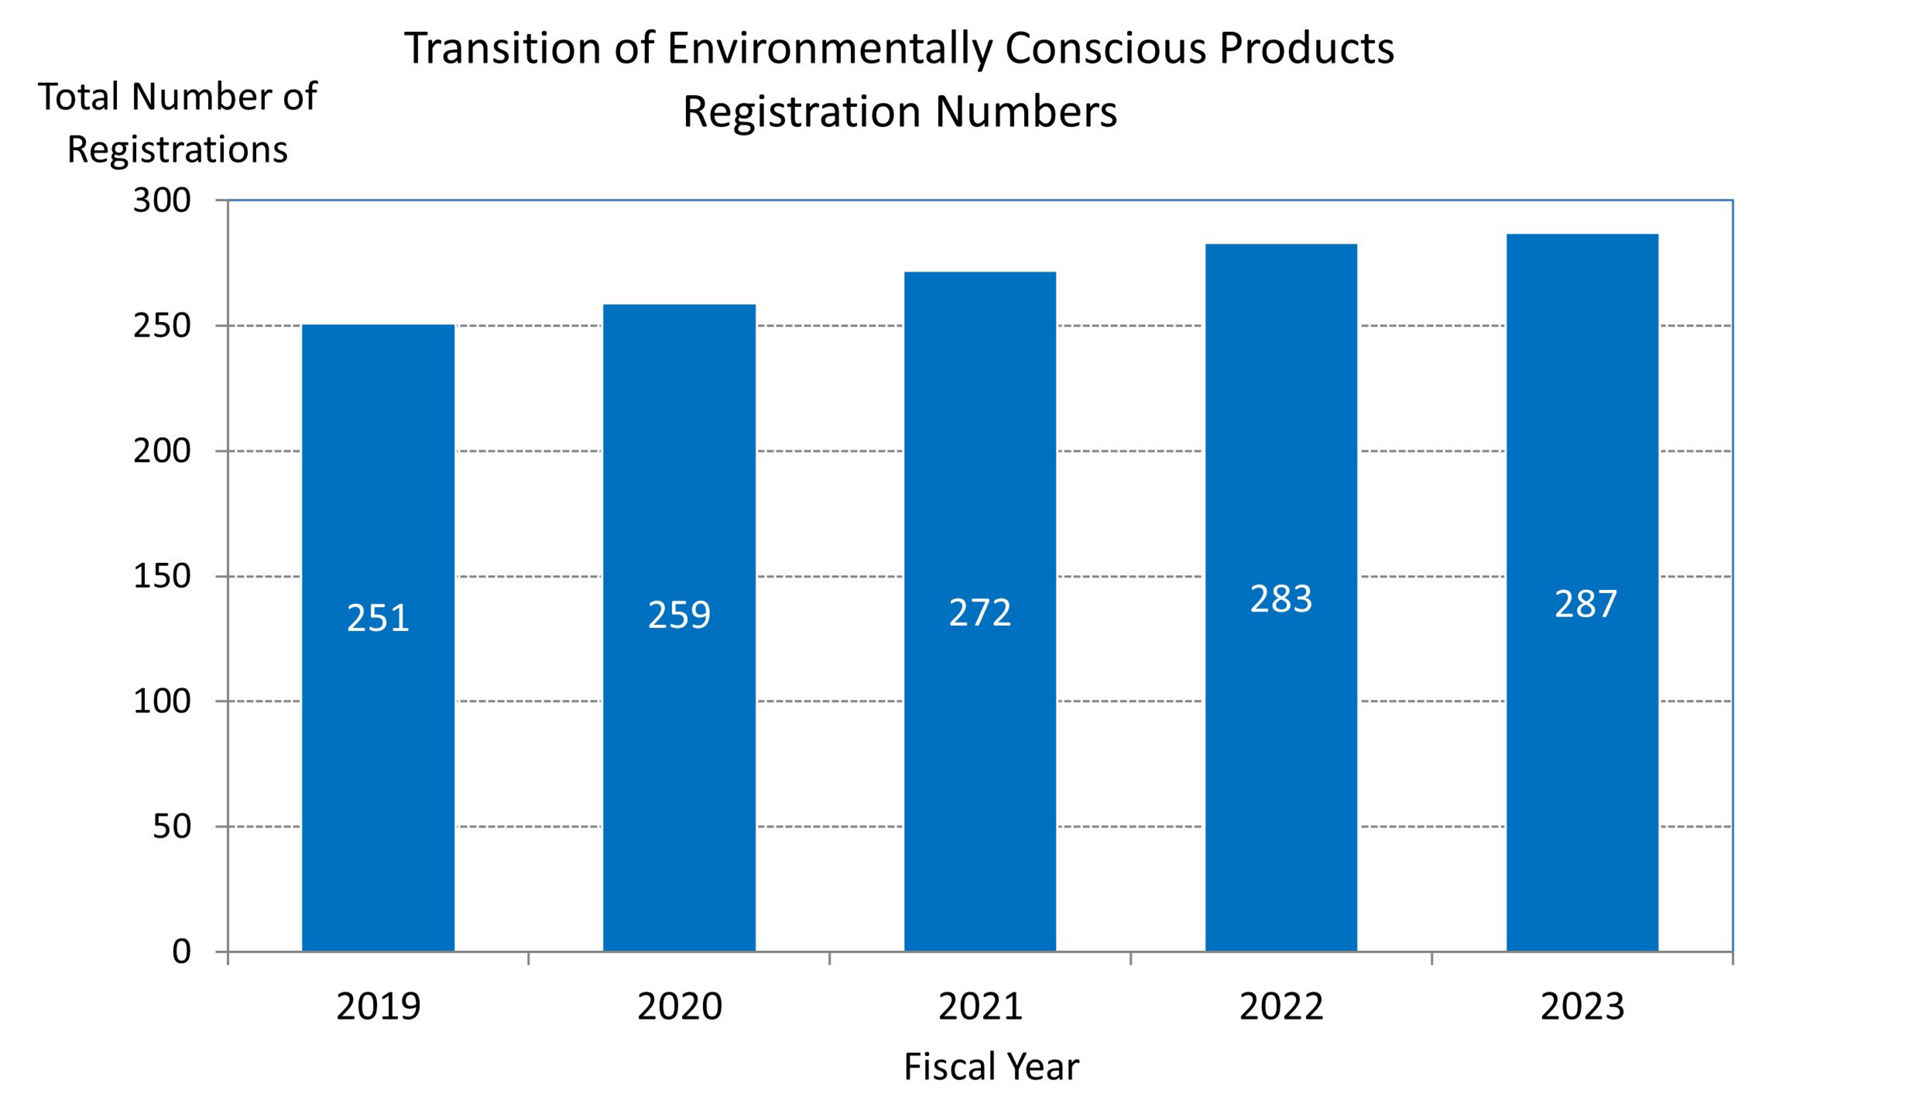 Transition of Environmentally Conscious Products Registration Numbers